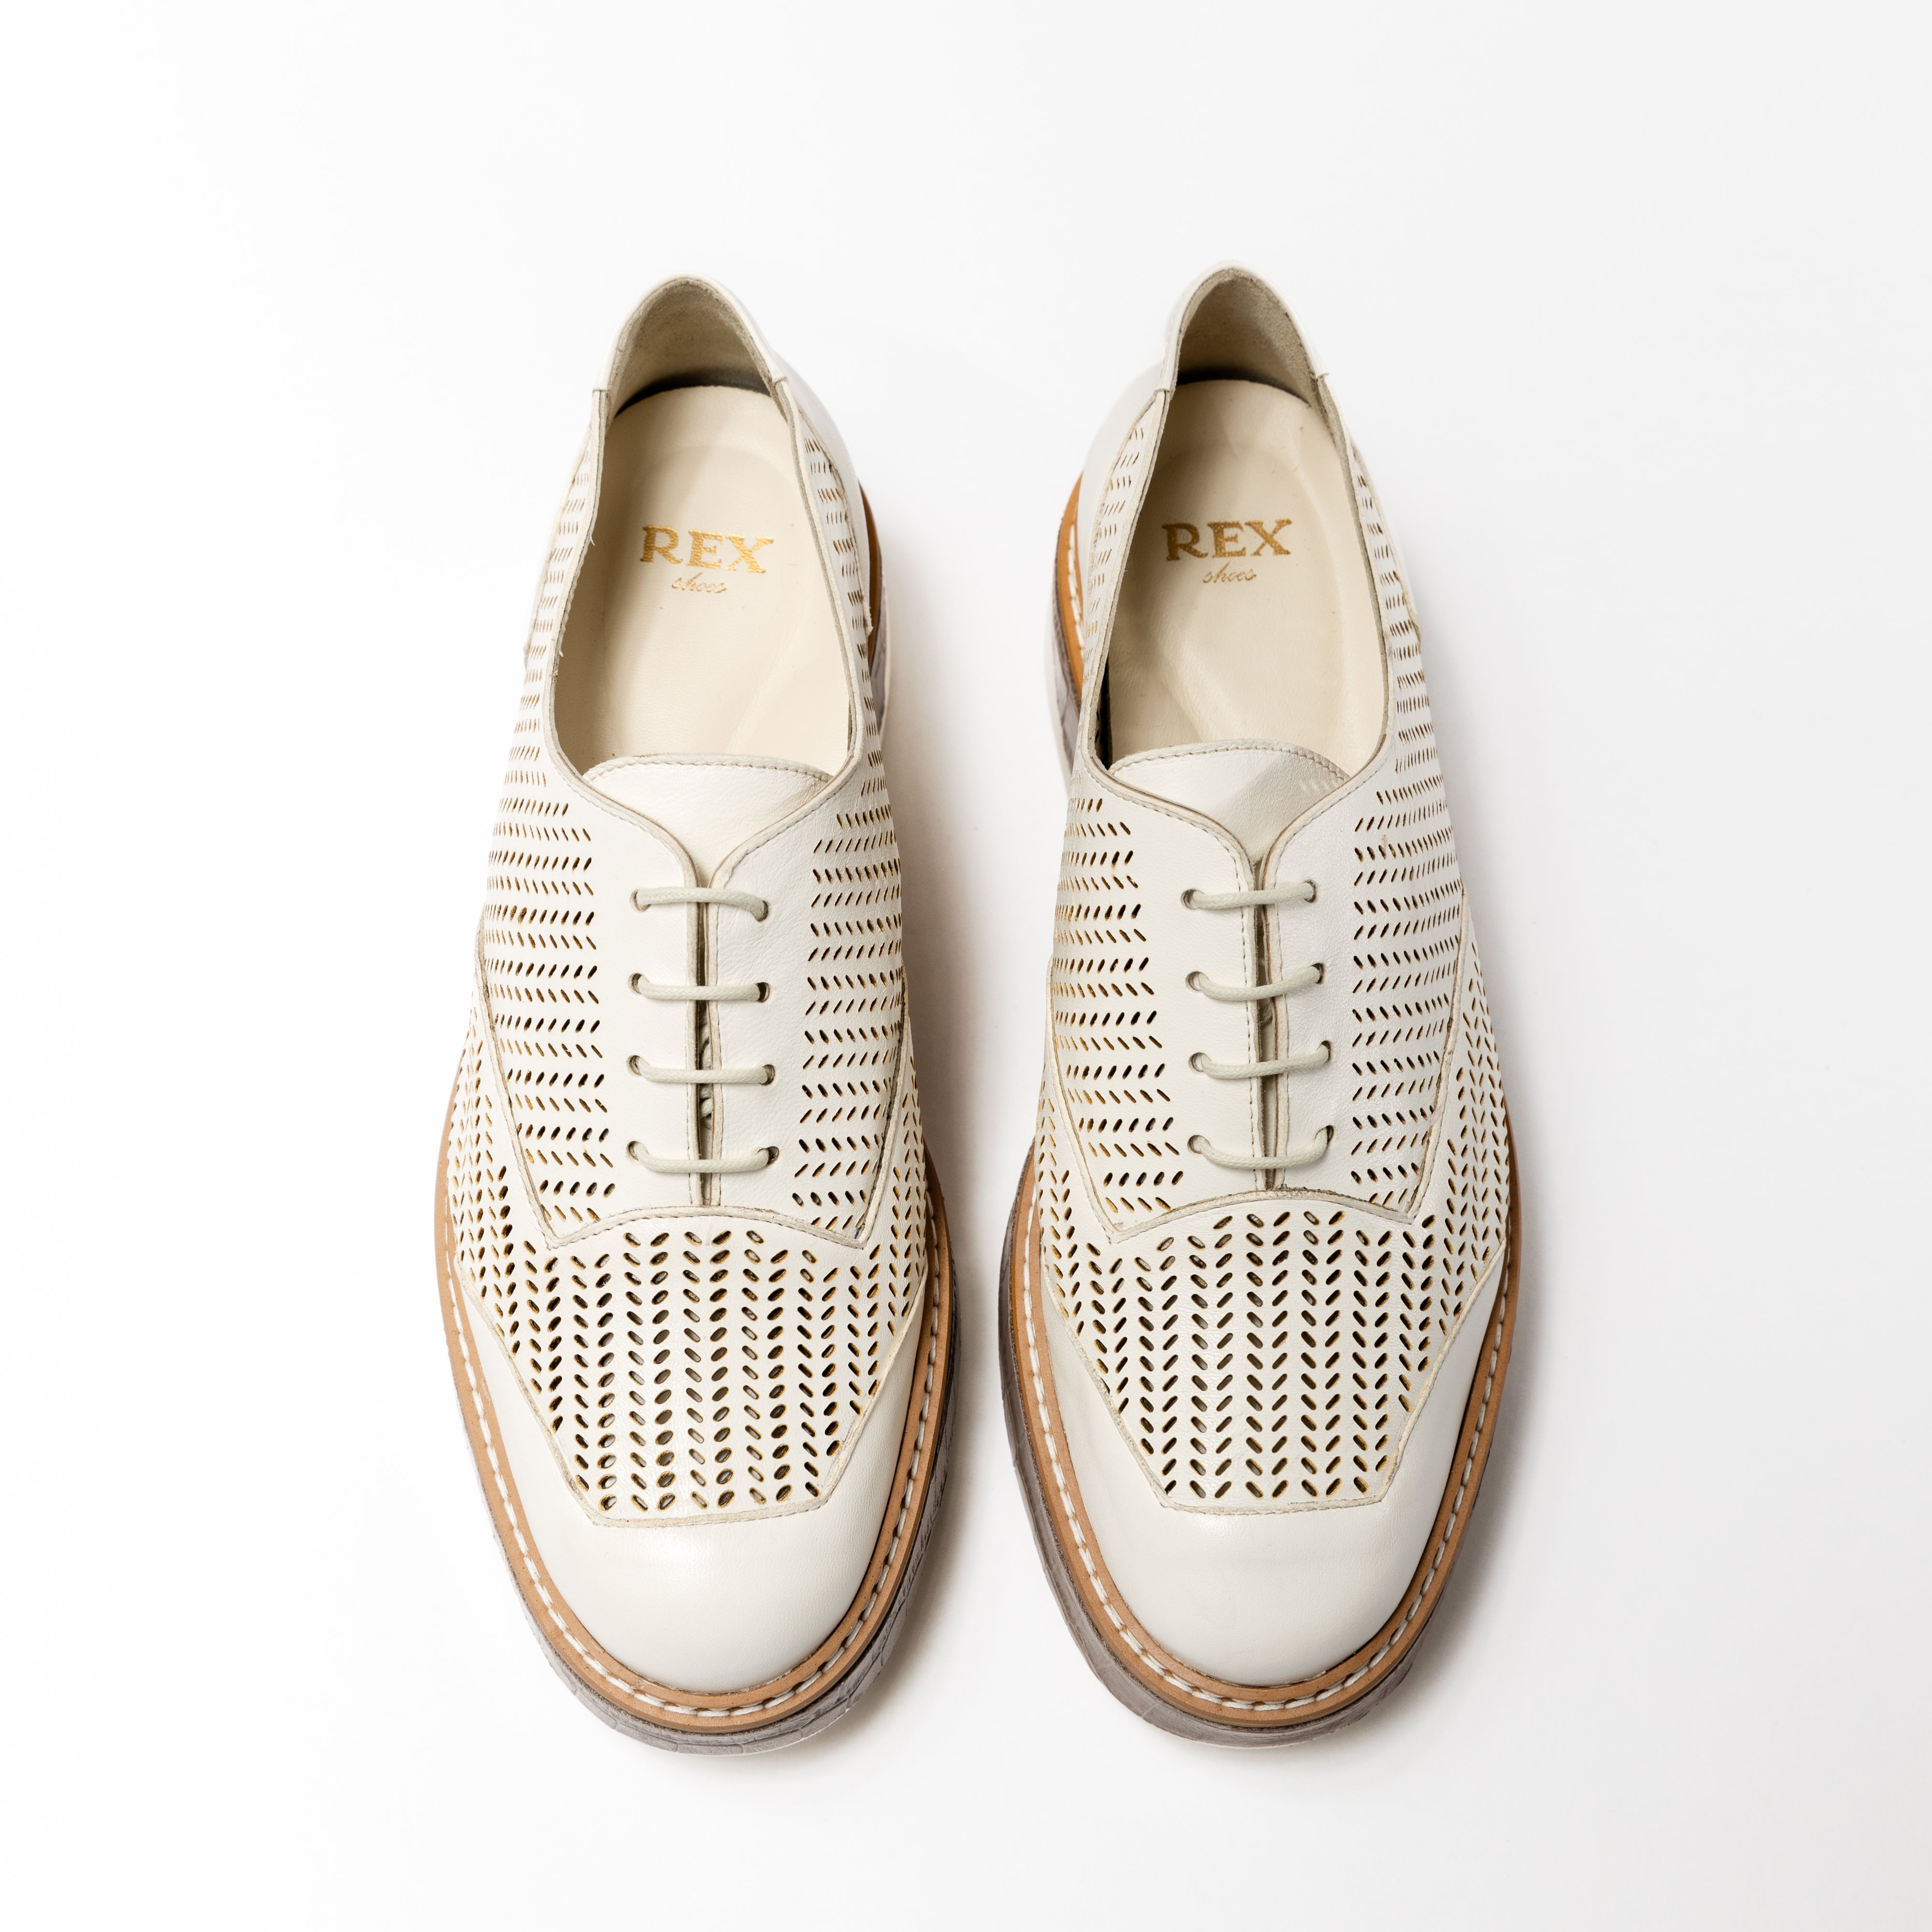 Top-down view of the &#39;Liz&#39; Oxford shoes in Panna Leather, showcasing a crisp white perforated upper and lace-up design, with a classic brown welt and white sole.